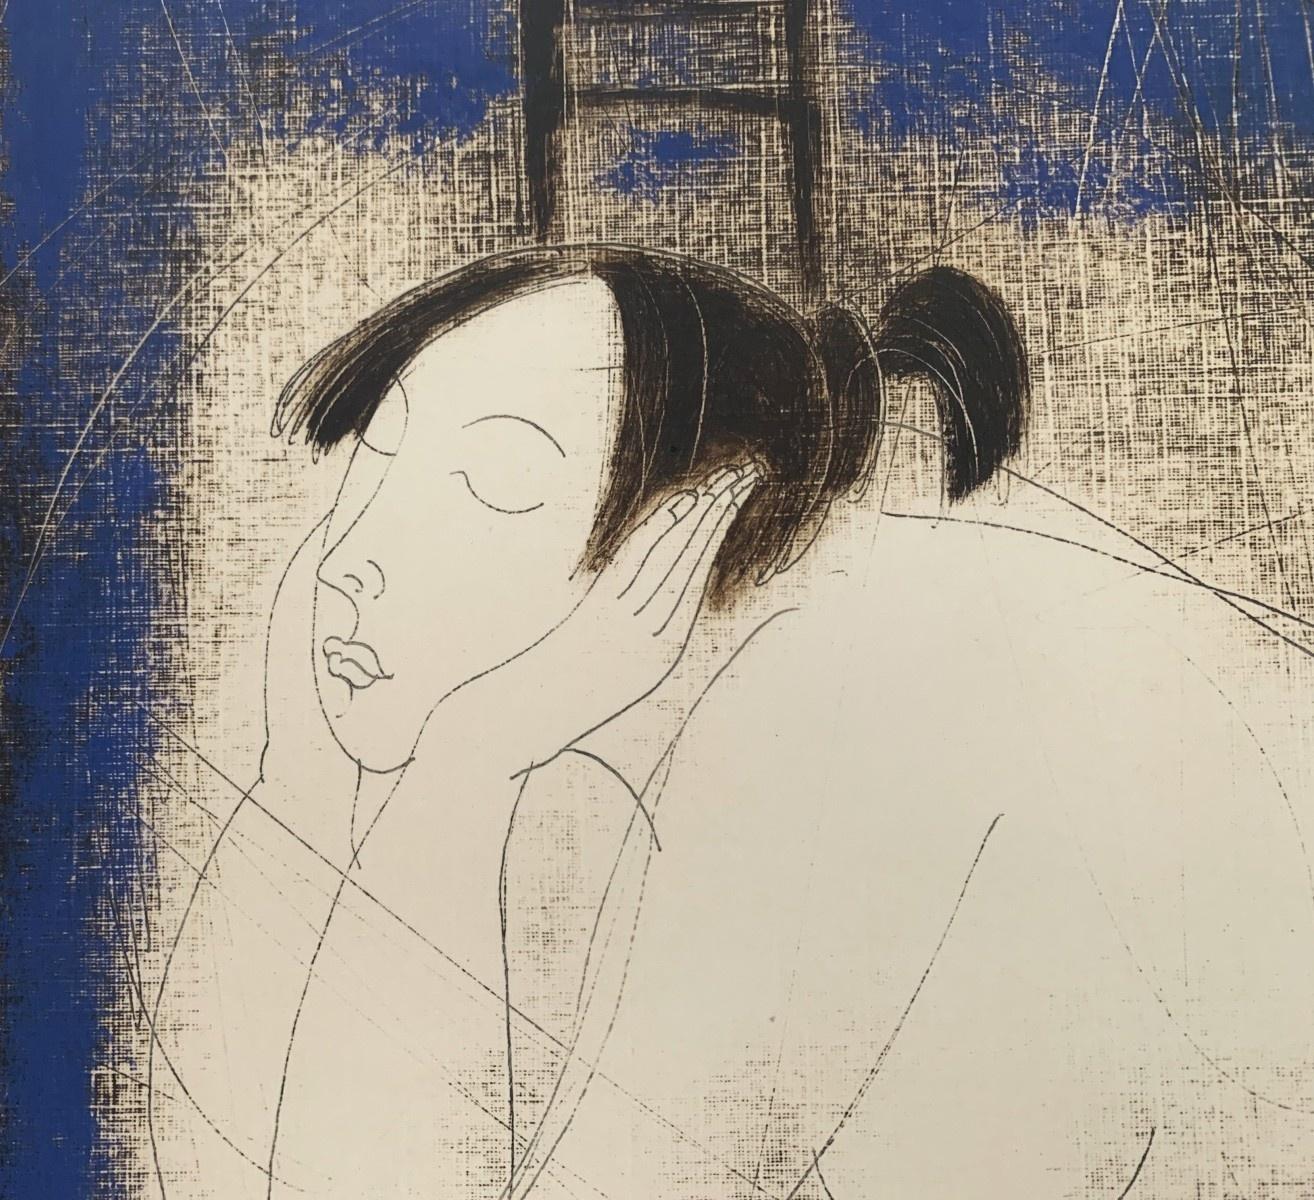 Contemporary figurative nude monotype print by Belarussian artist, Siergiej Timochow. Print depicts a woman laying with music notes in the background. The composition is monochromatic. The paper/cardboard is textured. 

Siergiej Timochow (b. in